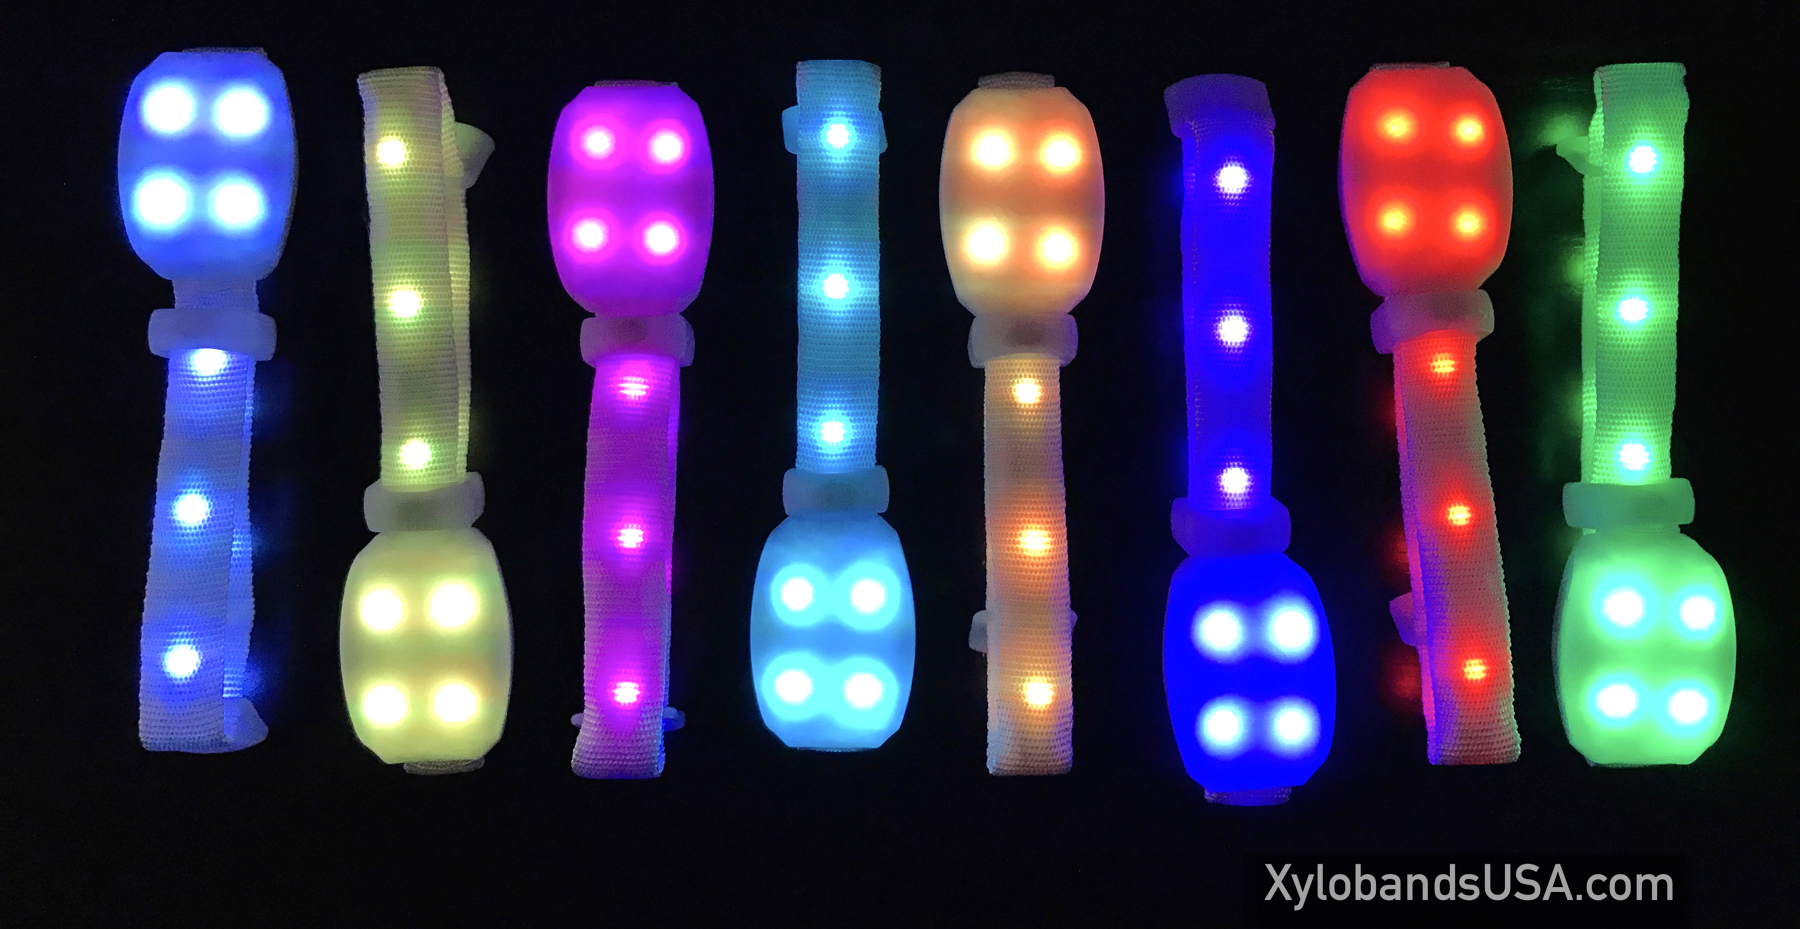 The Xylobands Guide that how to use Festival and Event Wristbands by  Xylobands - Issuu